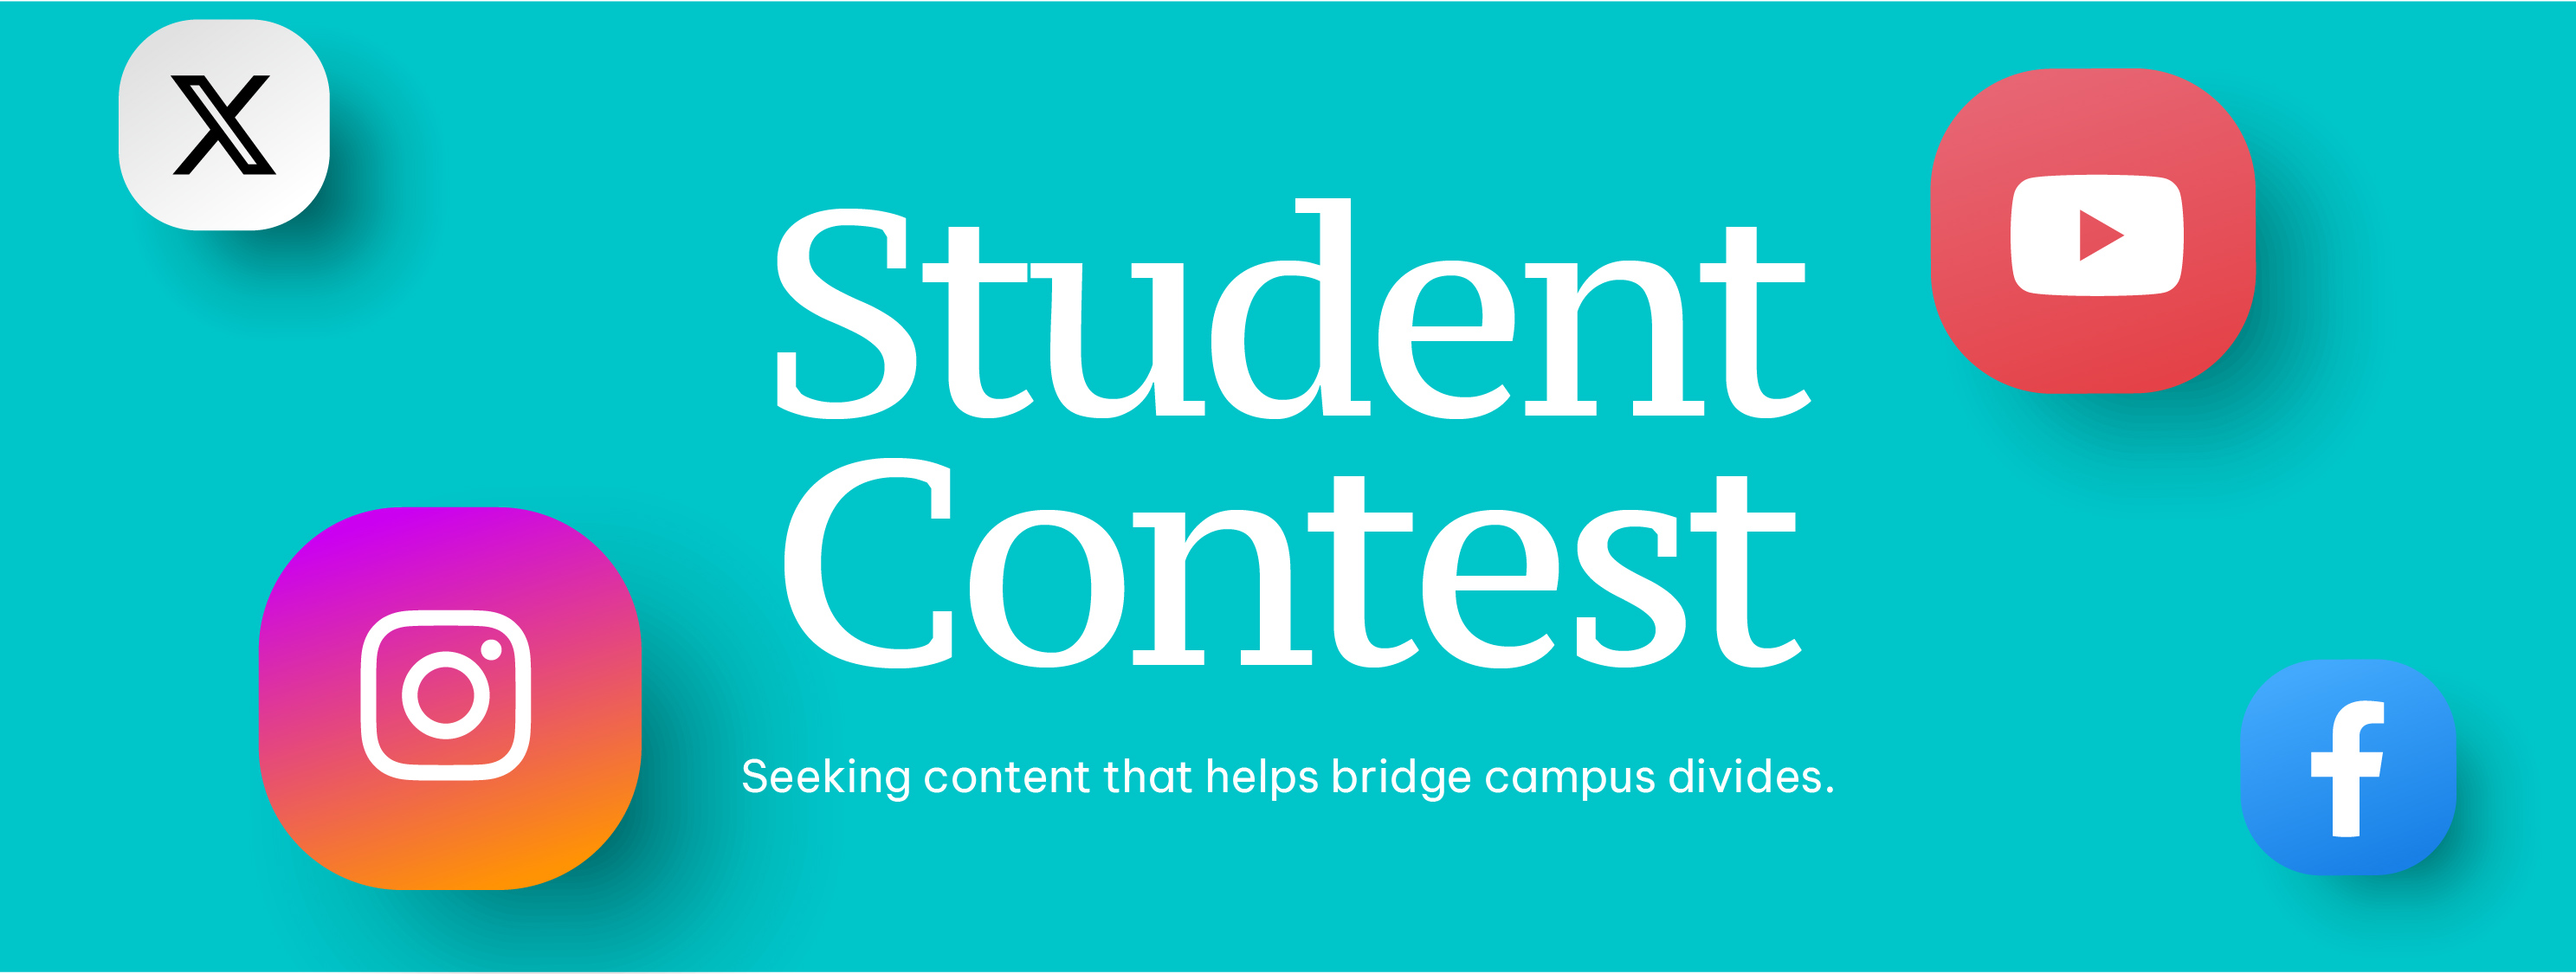 AAA-ICDR Foundation & #CampusBridge Student Social Video Contest 